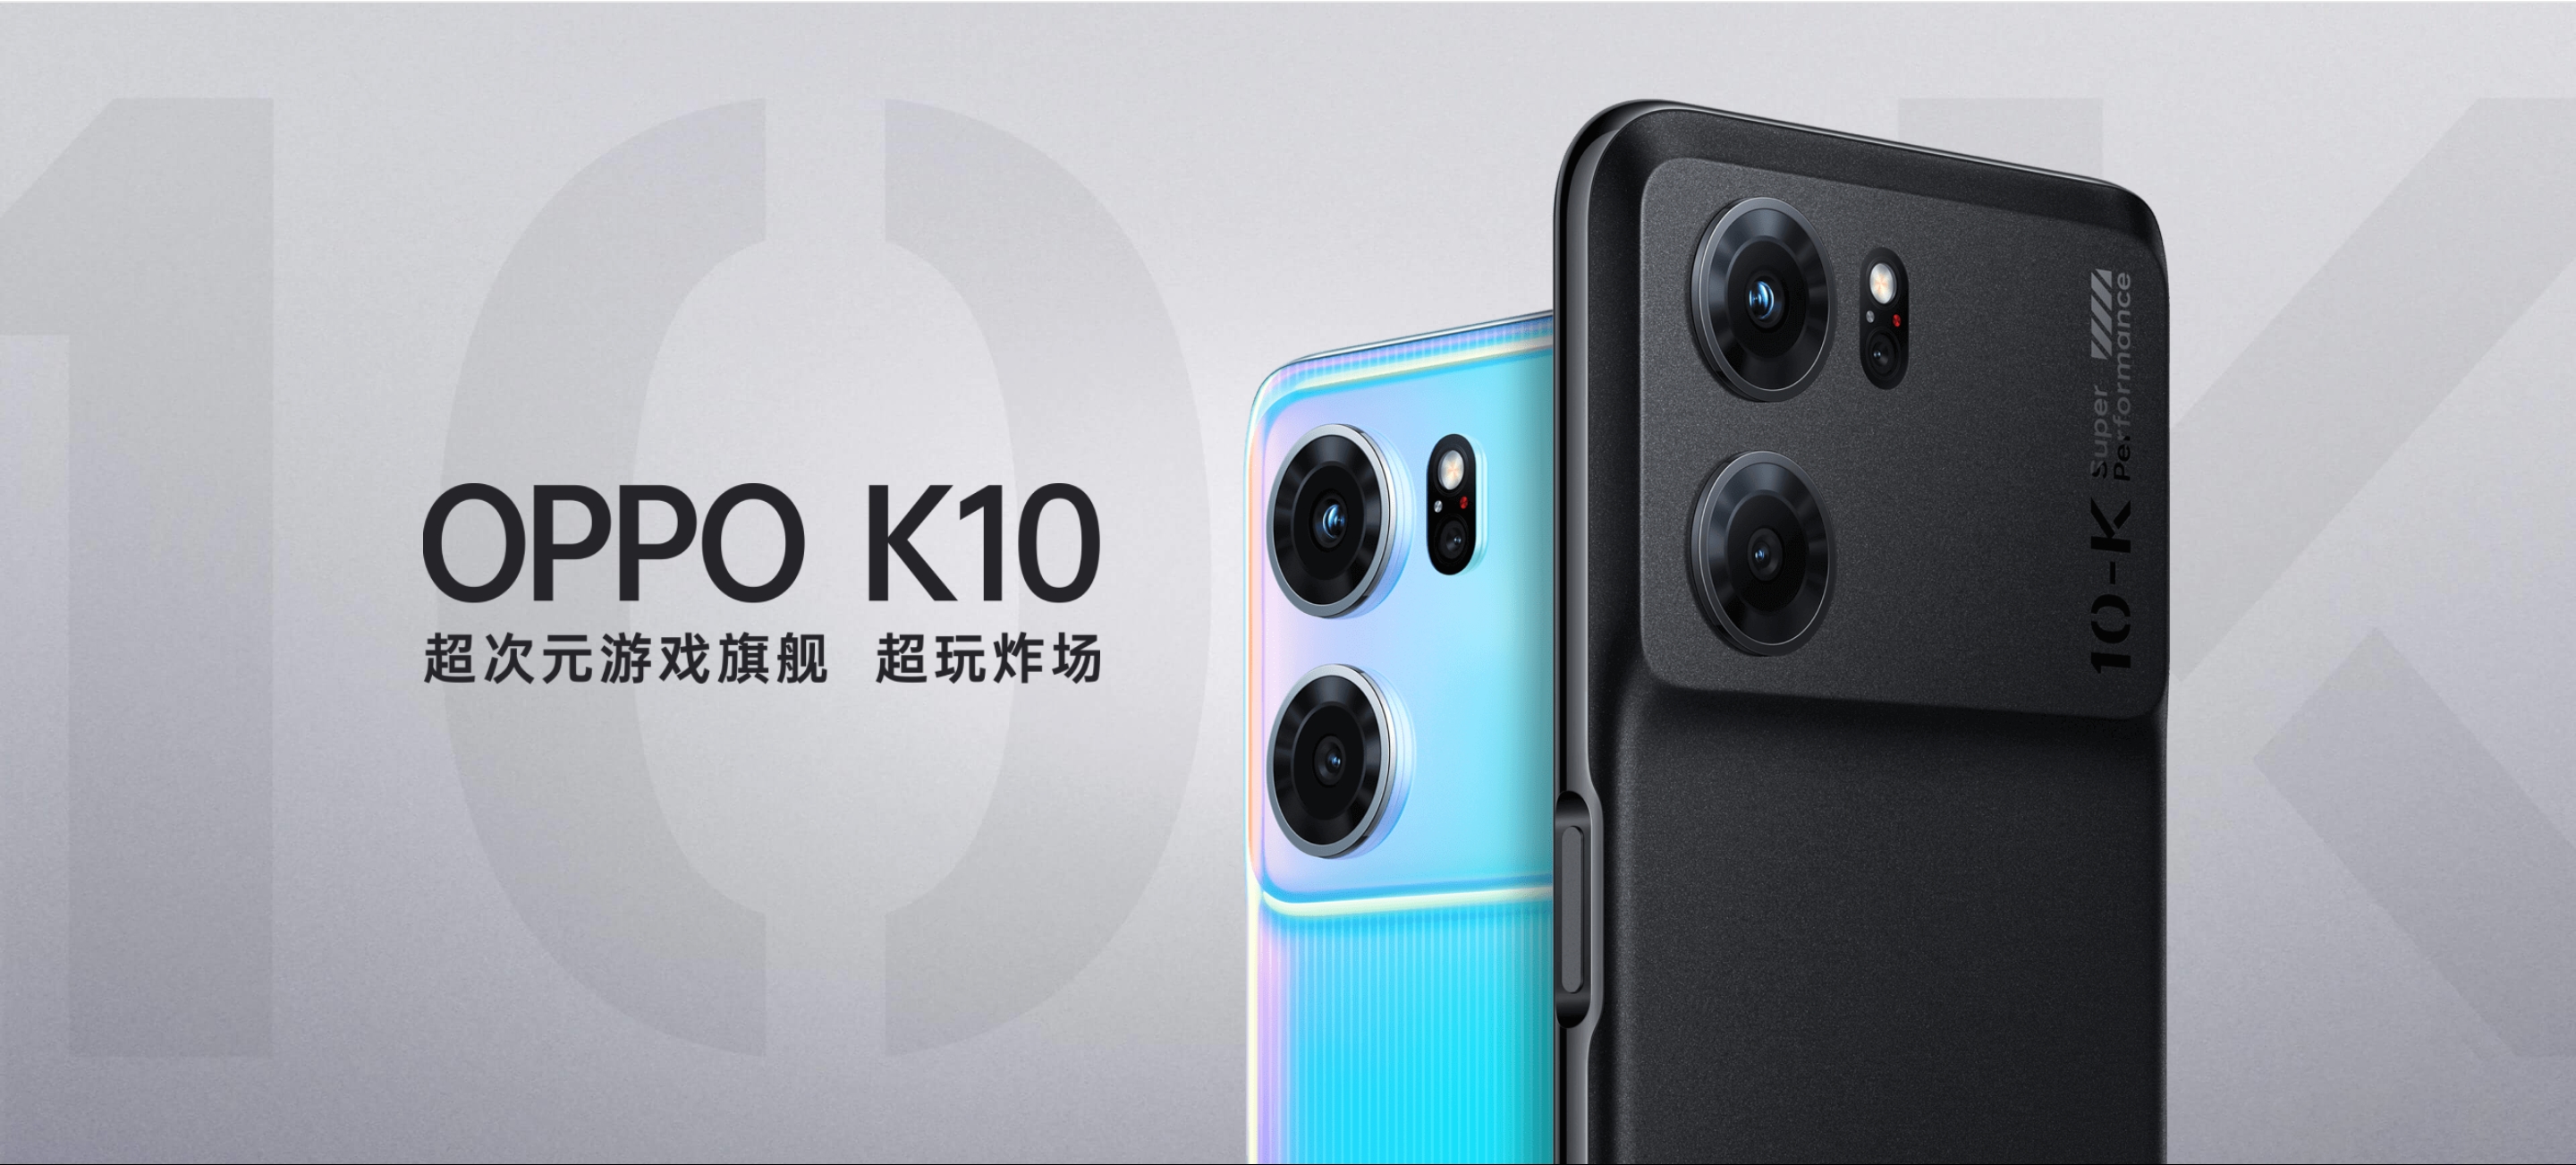 OPPO K10 5G: Simplified version of OPPO K10 Pro with LCD screen and MediaTek Dimensity 8000 Max chip